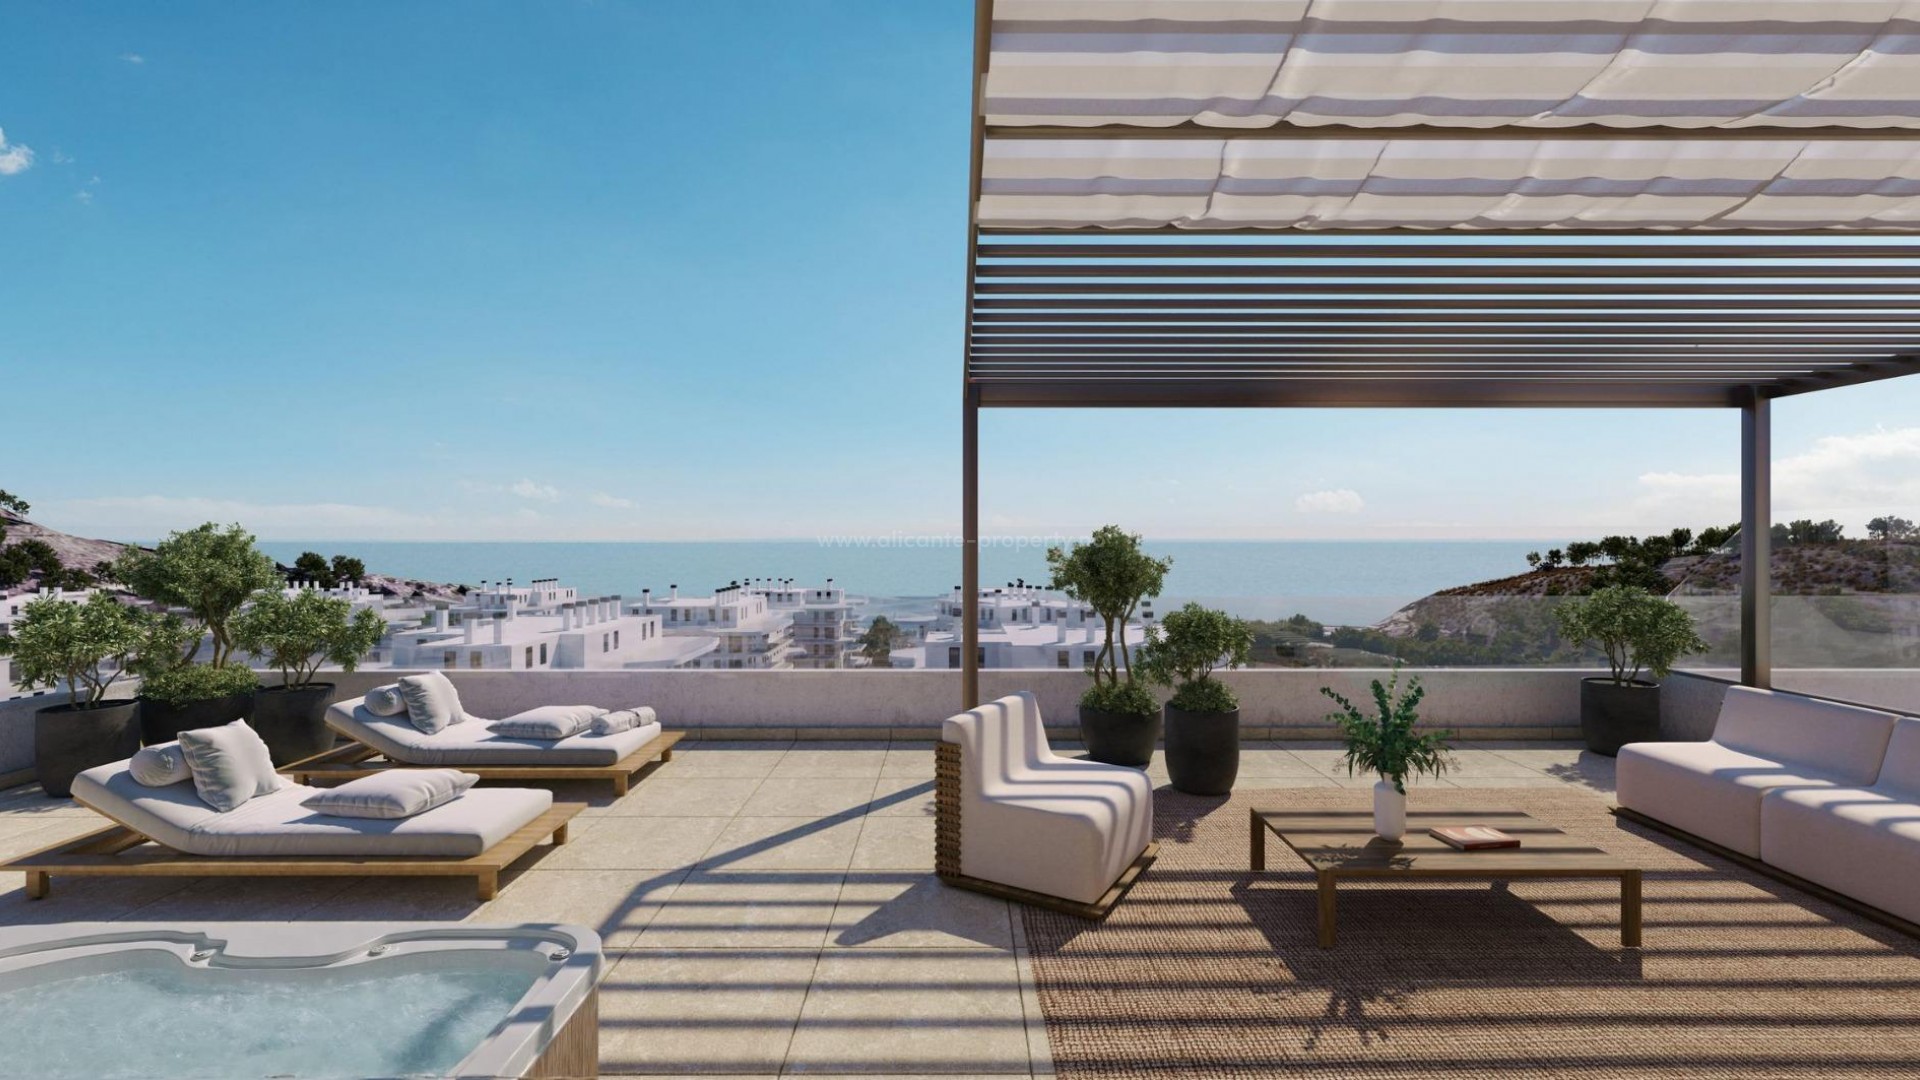 New apartments in Villajoyosa only 450 meters from the beach, 2/3 bedrooms, 2 bathrooms, swimming pool, gym, large terrace. 1 floor with private garden.